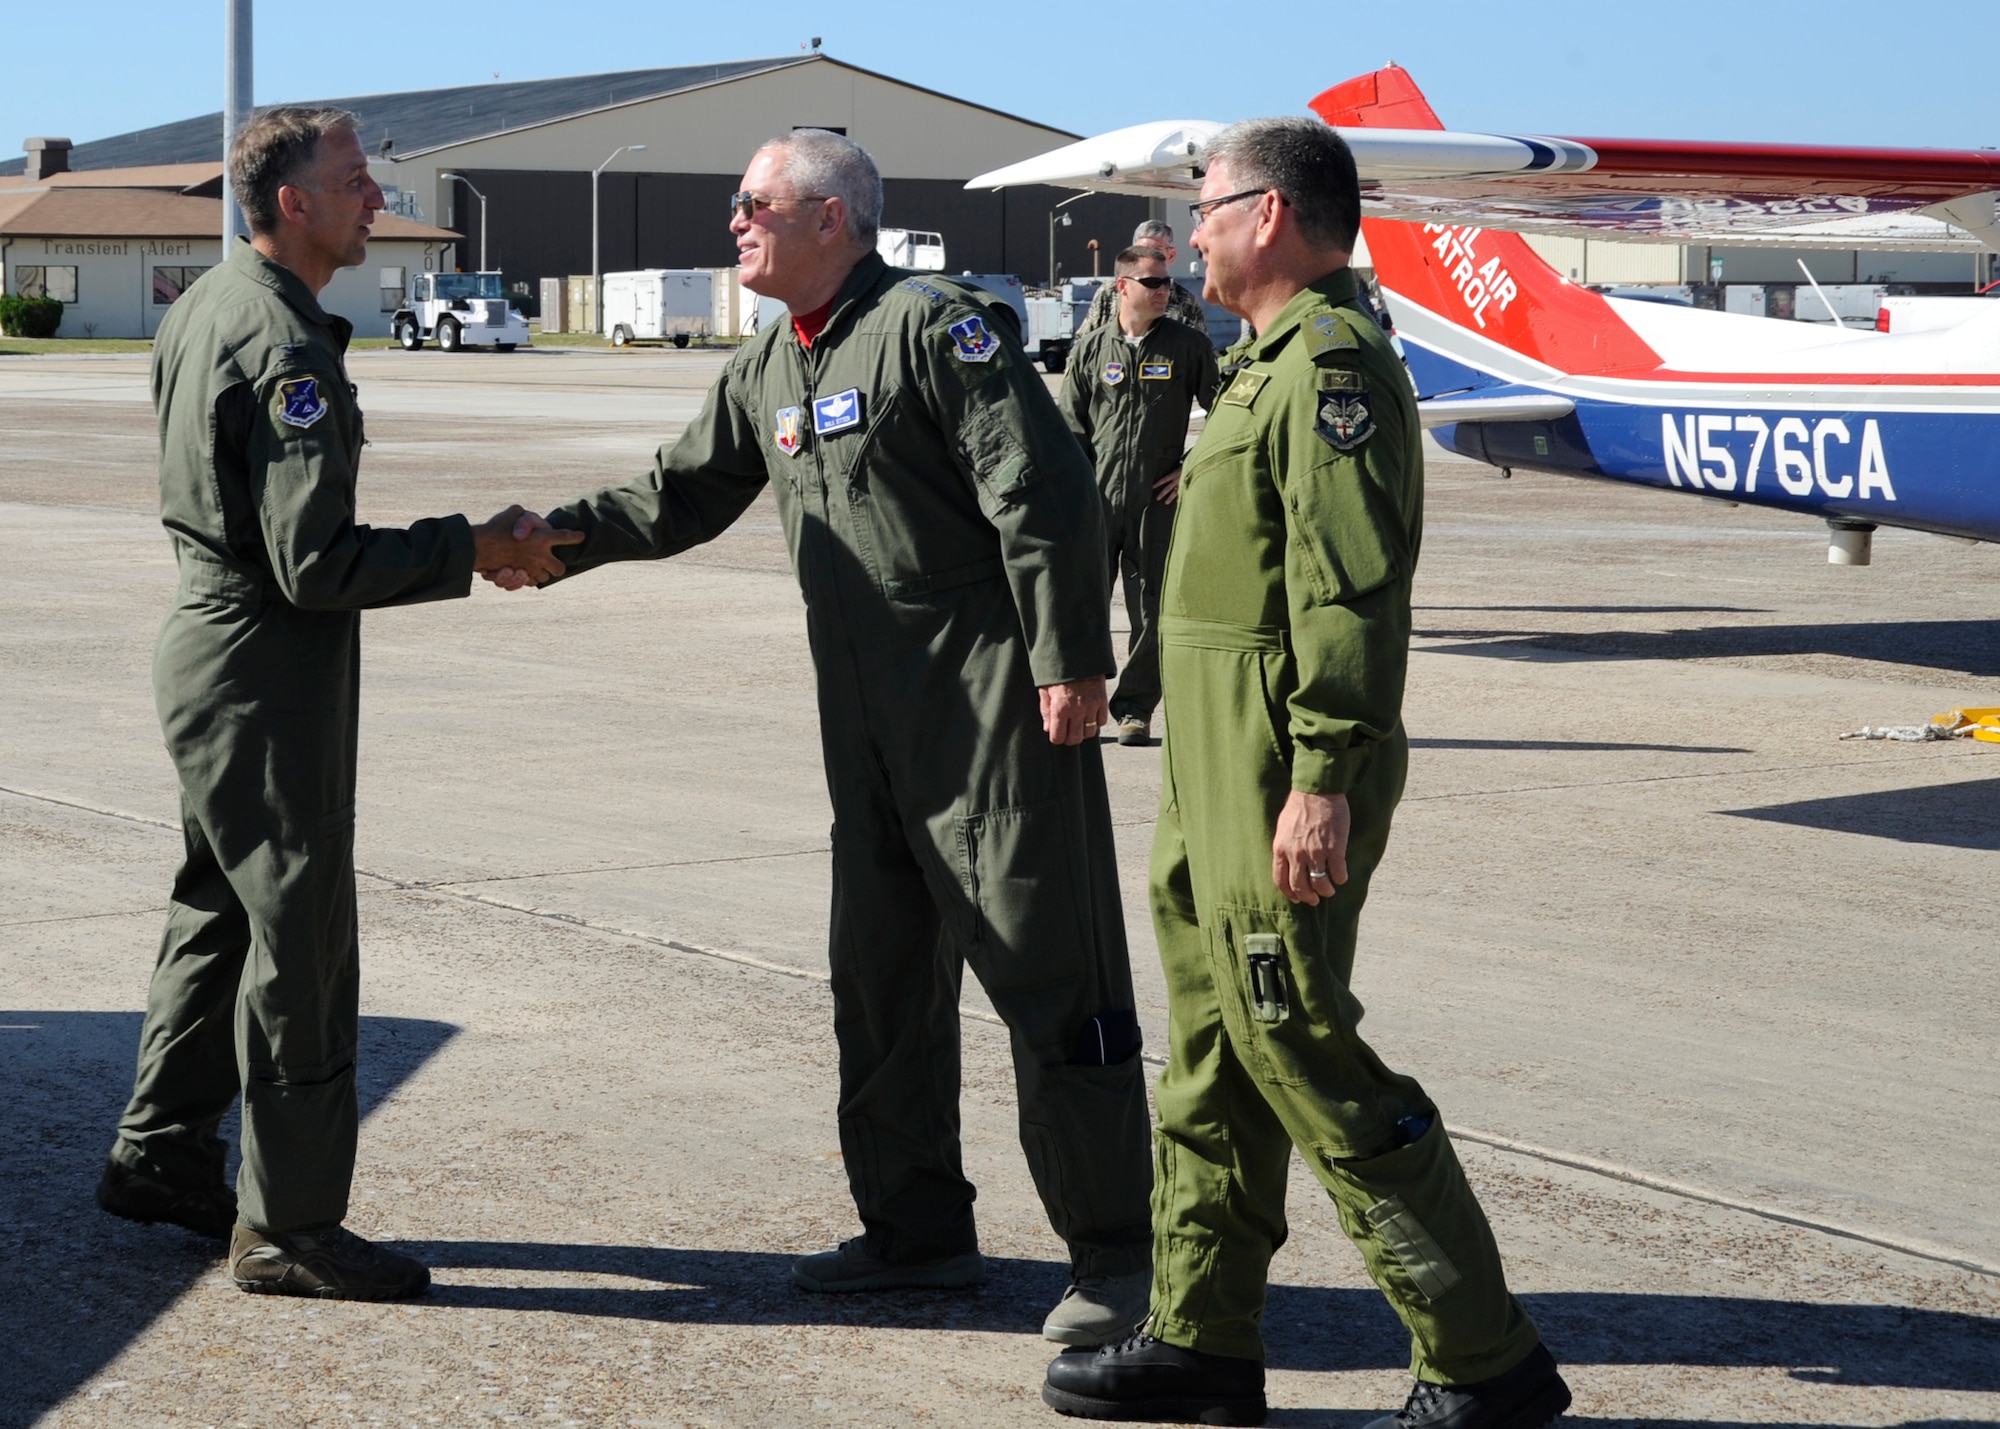 Civil Air Patrol National Command CAP Maj. Gen. Joe Vazquez (left) is greeted by Lt. Gen. William Etter, commander of Continental U.S. NORAD Region-1st Air Force (Air Forces Northern) and Canadian Brig. Gen. Paul Ormsby, CONR deputy commander. Vazquez visited Tyndall AFB to take part in the Transfer of Authority ceremony held to recognize the realignment of the Civil Air Patrol-U.S. Air Force – or CAP-USAF – from Air Education and Training Command to Air Combat Command. (U.S. Air Force photo by SrA Solomon Cook)